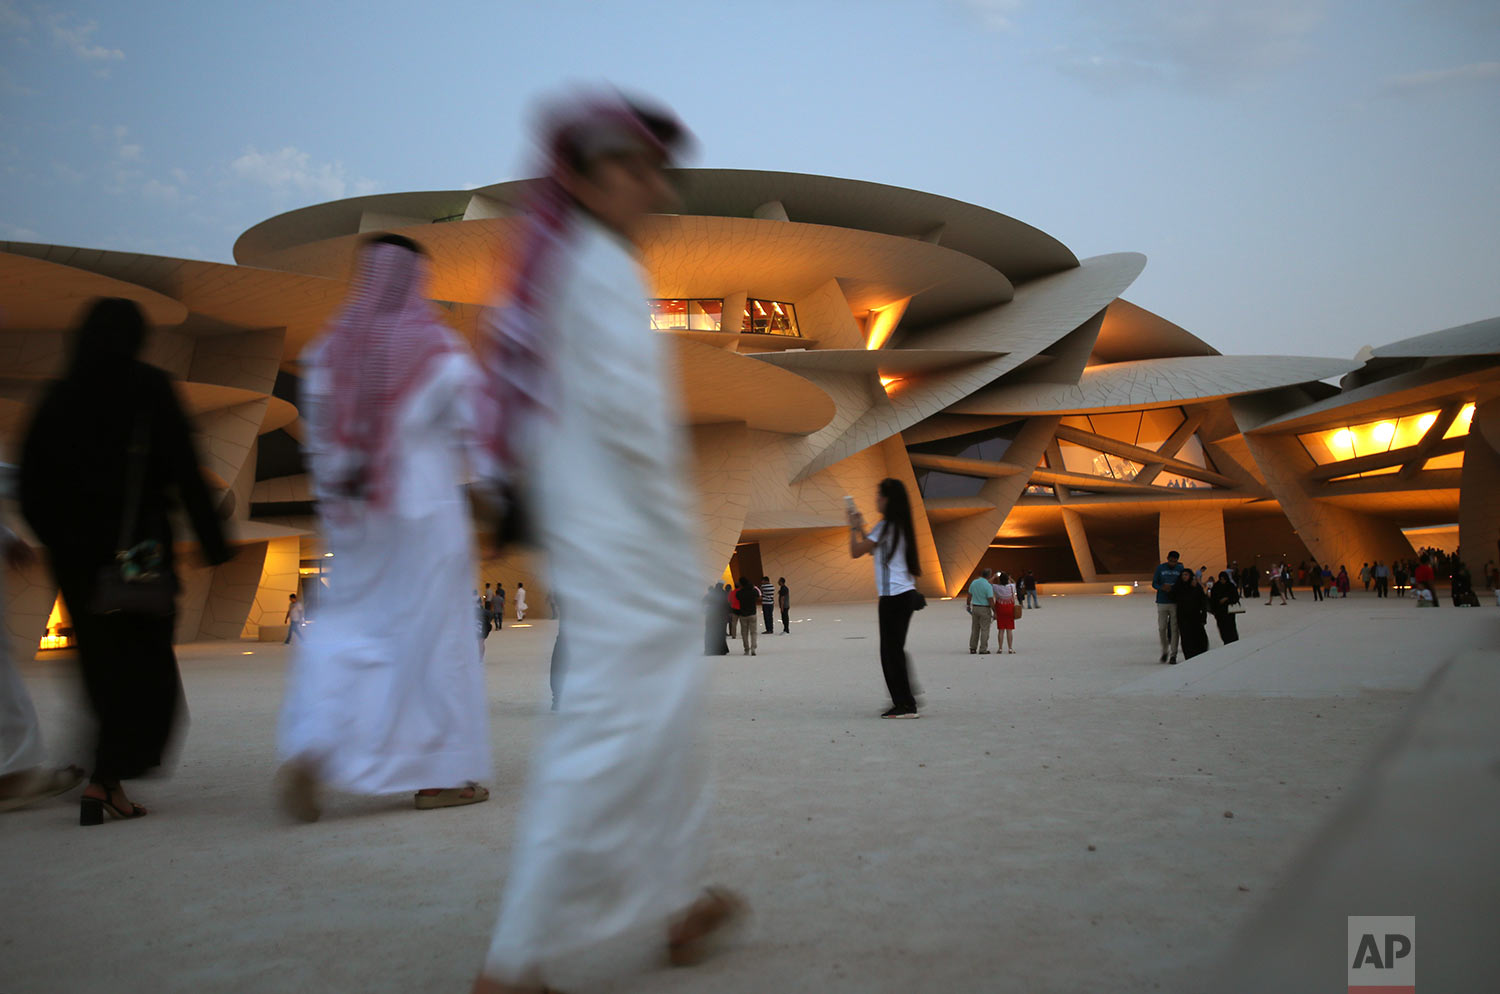  In this Saturday, April 20, 2019 photo, people visit the National Museum of Qatar designed by French architect, Jean Nouvel who got his inspiration from the desert rose crystal and has been opened on March 28th in Doha, Qatar. (AP Photo/Kamran Jebre